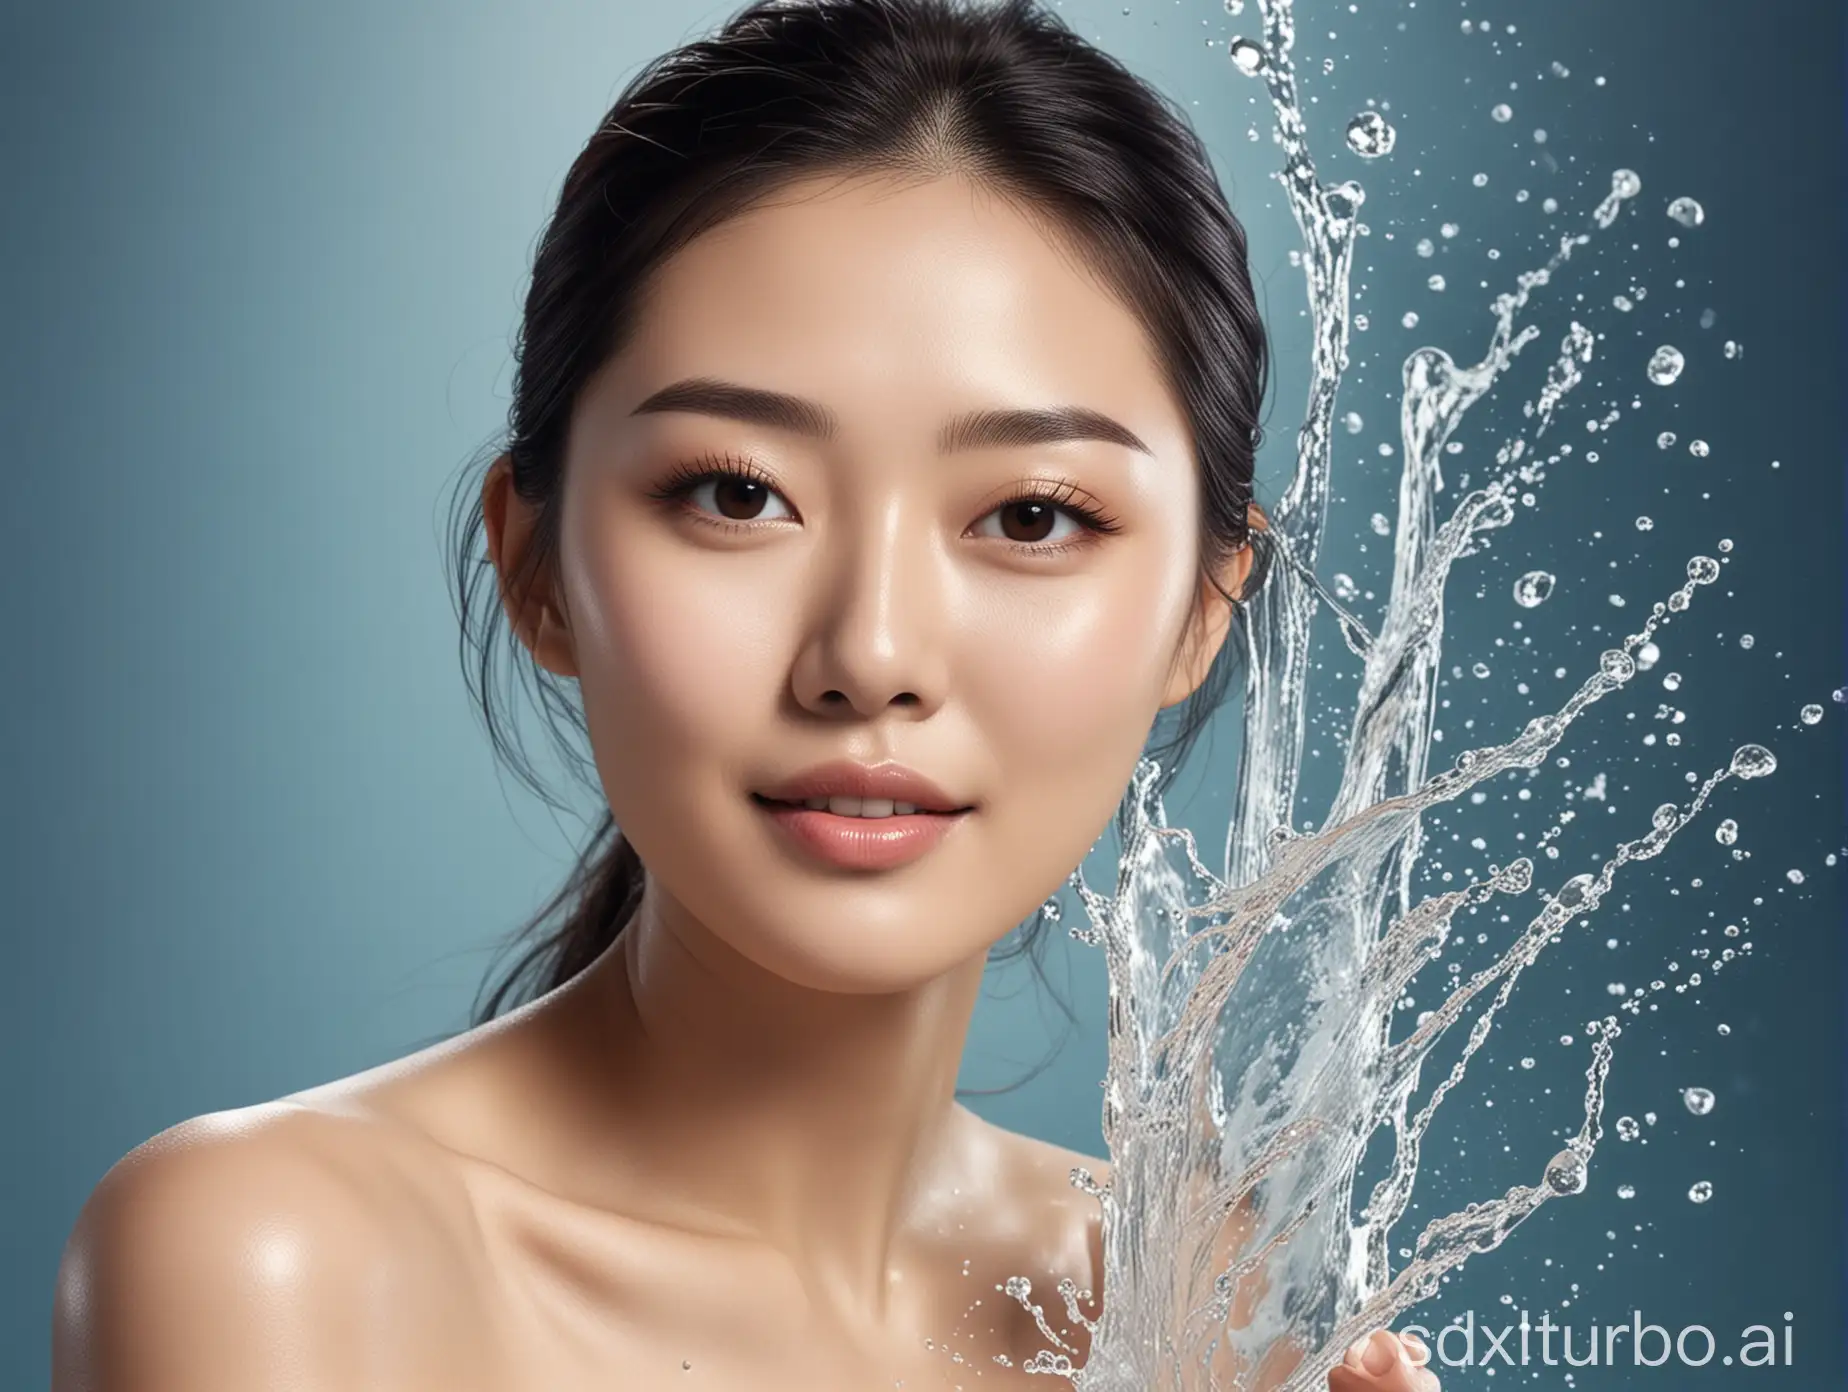 Water background, an advertisement for a skincare product featuring an Asian character.